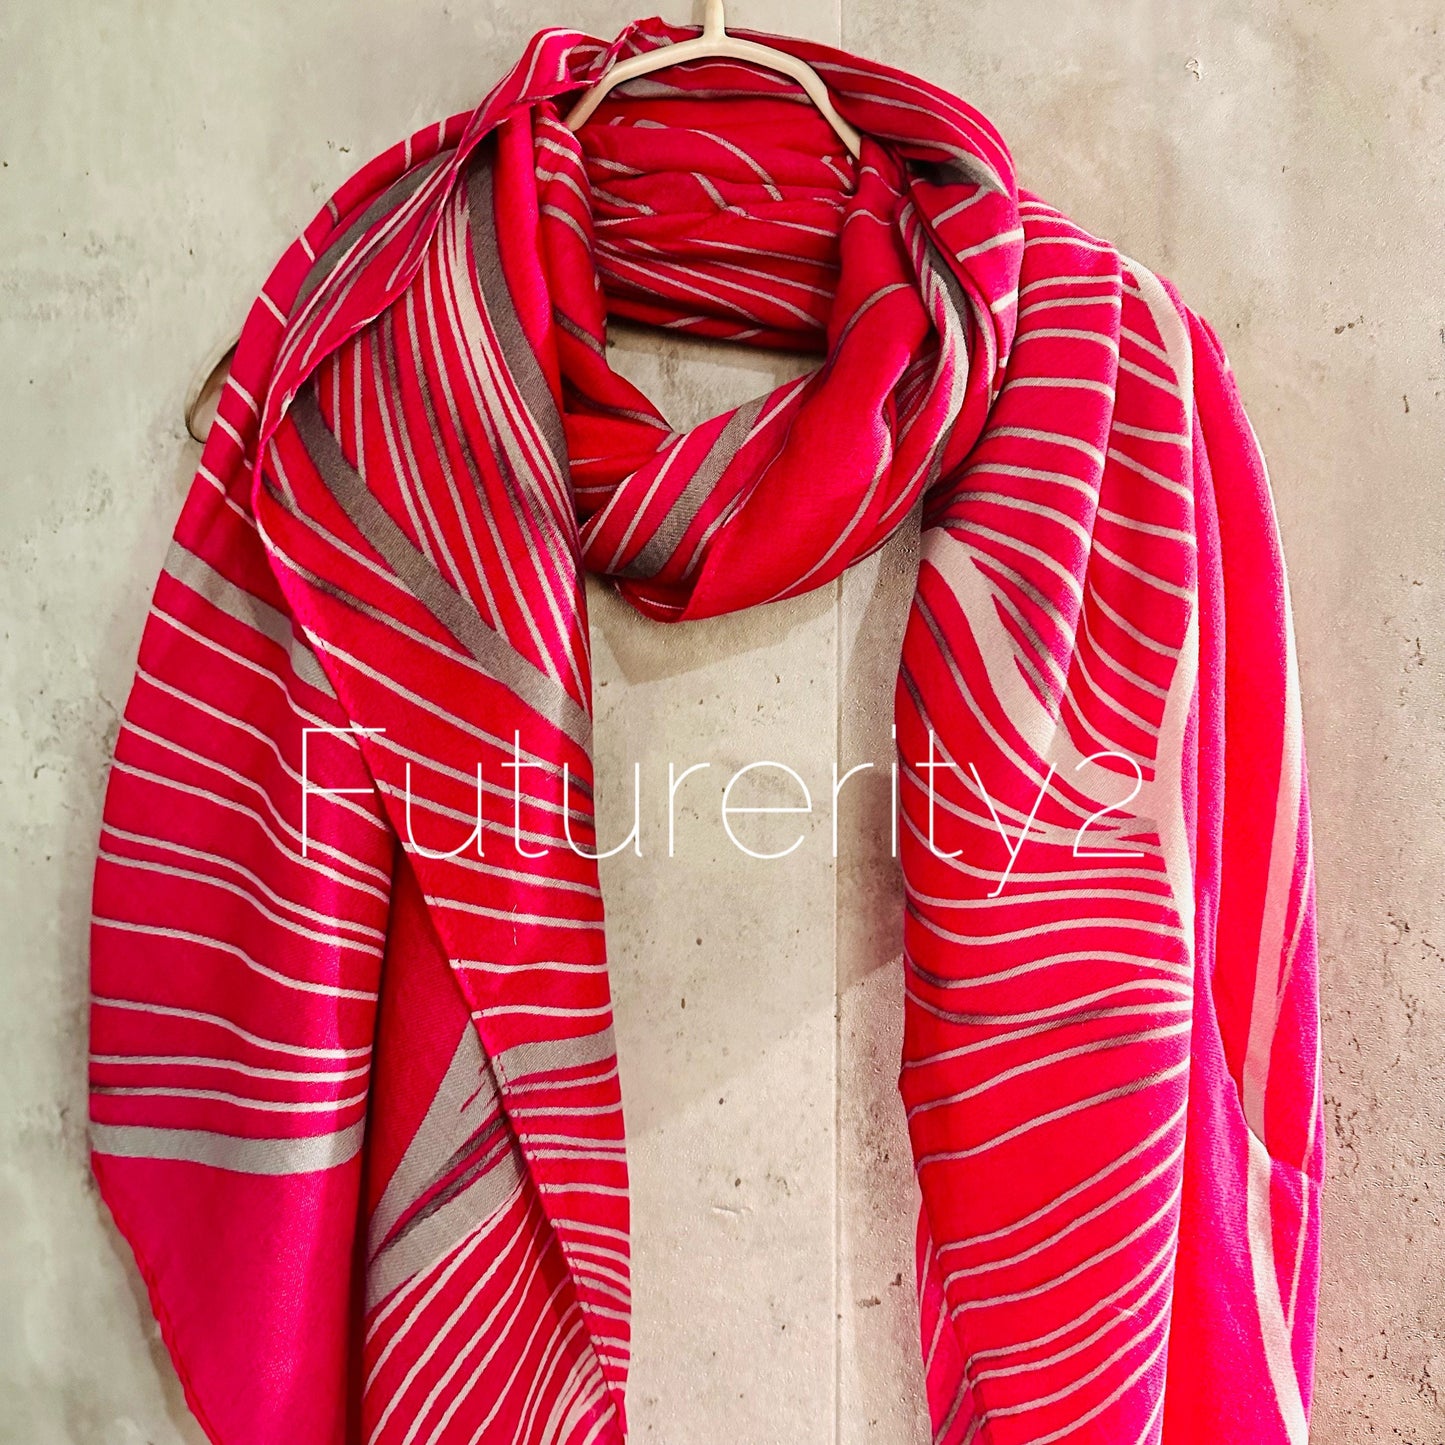 Pink Organic Cotton Scarf with Leaf Vein Pattern – An Eco-Friendly Gift for Mom, Perfect for Birthday and Christmas, from a UK Seller